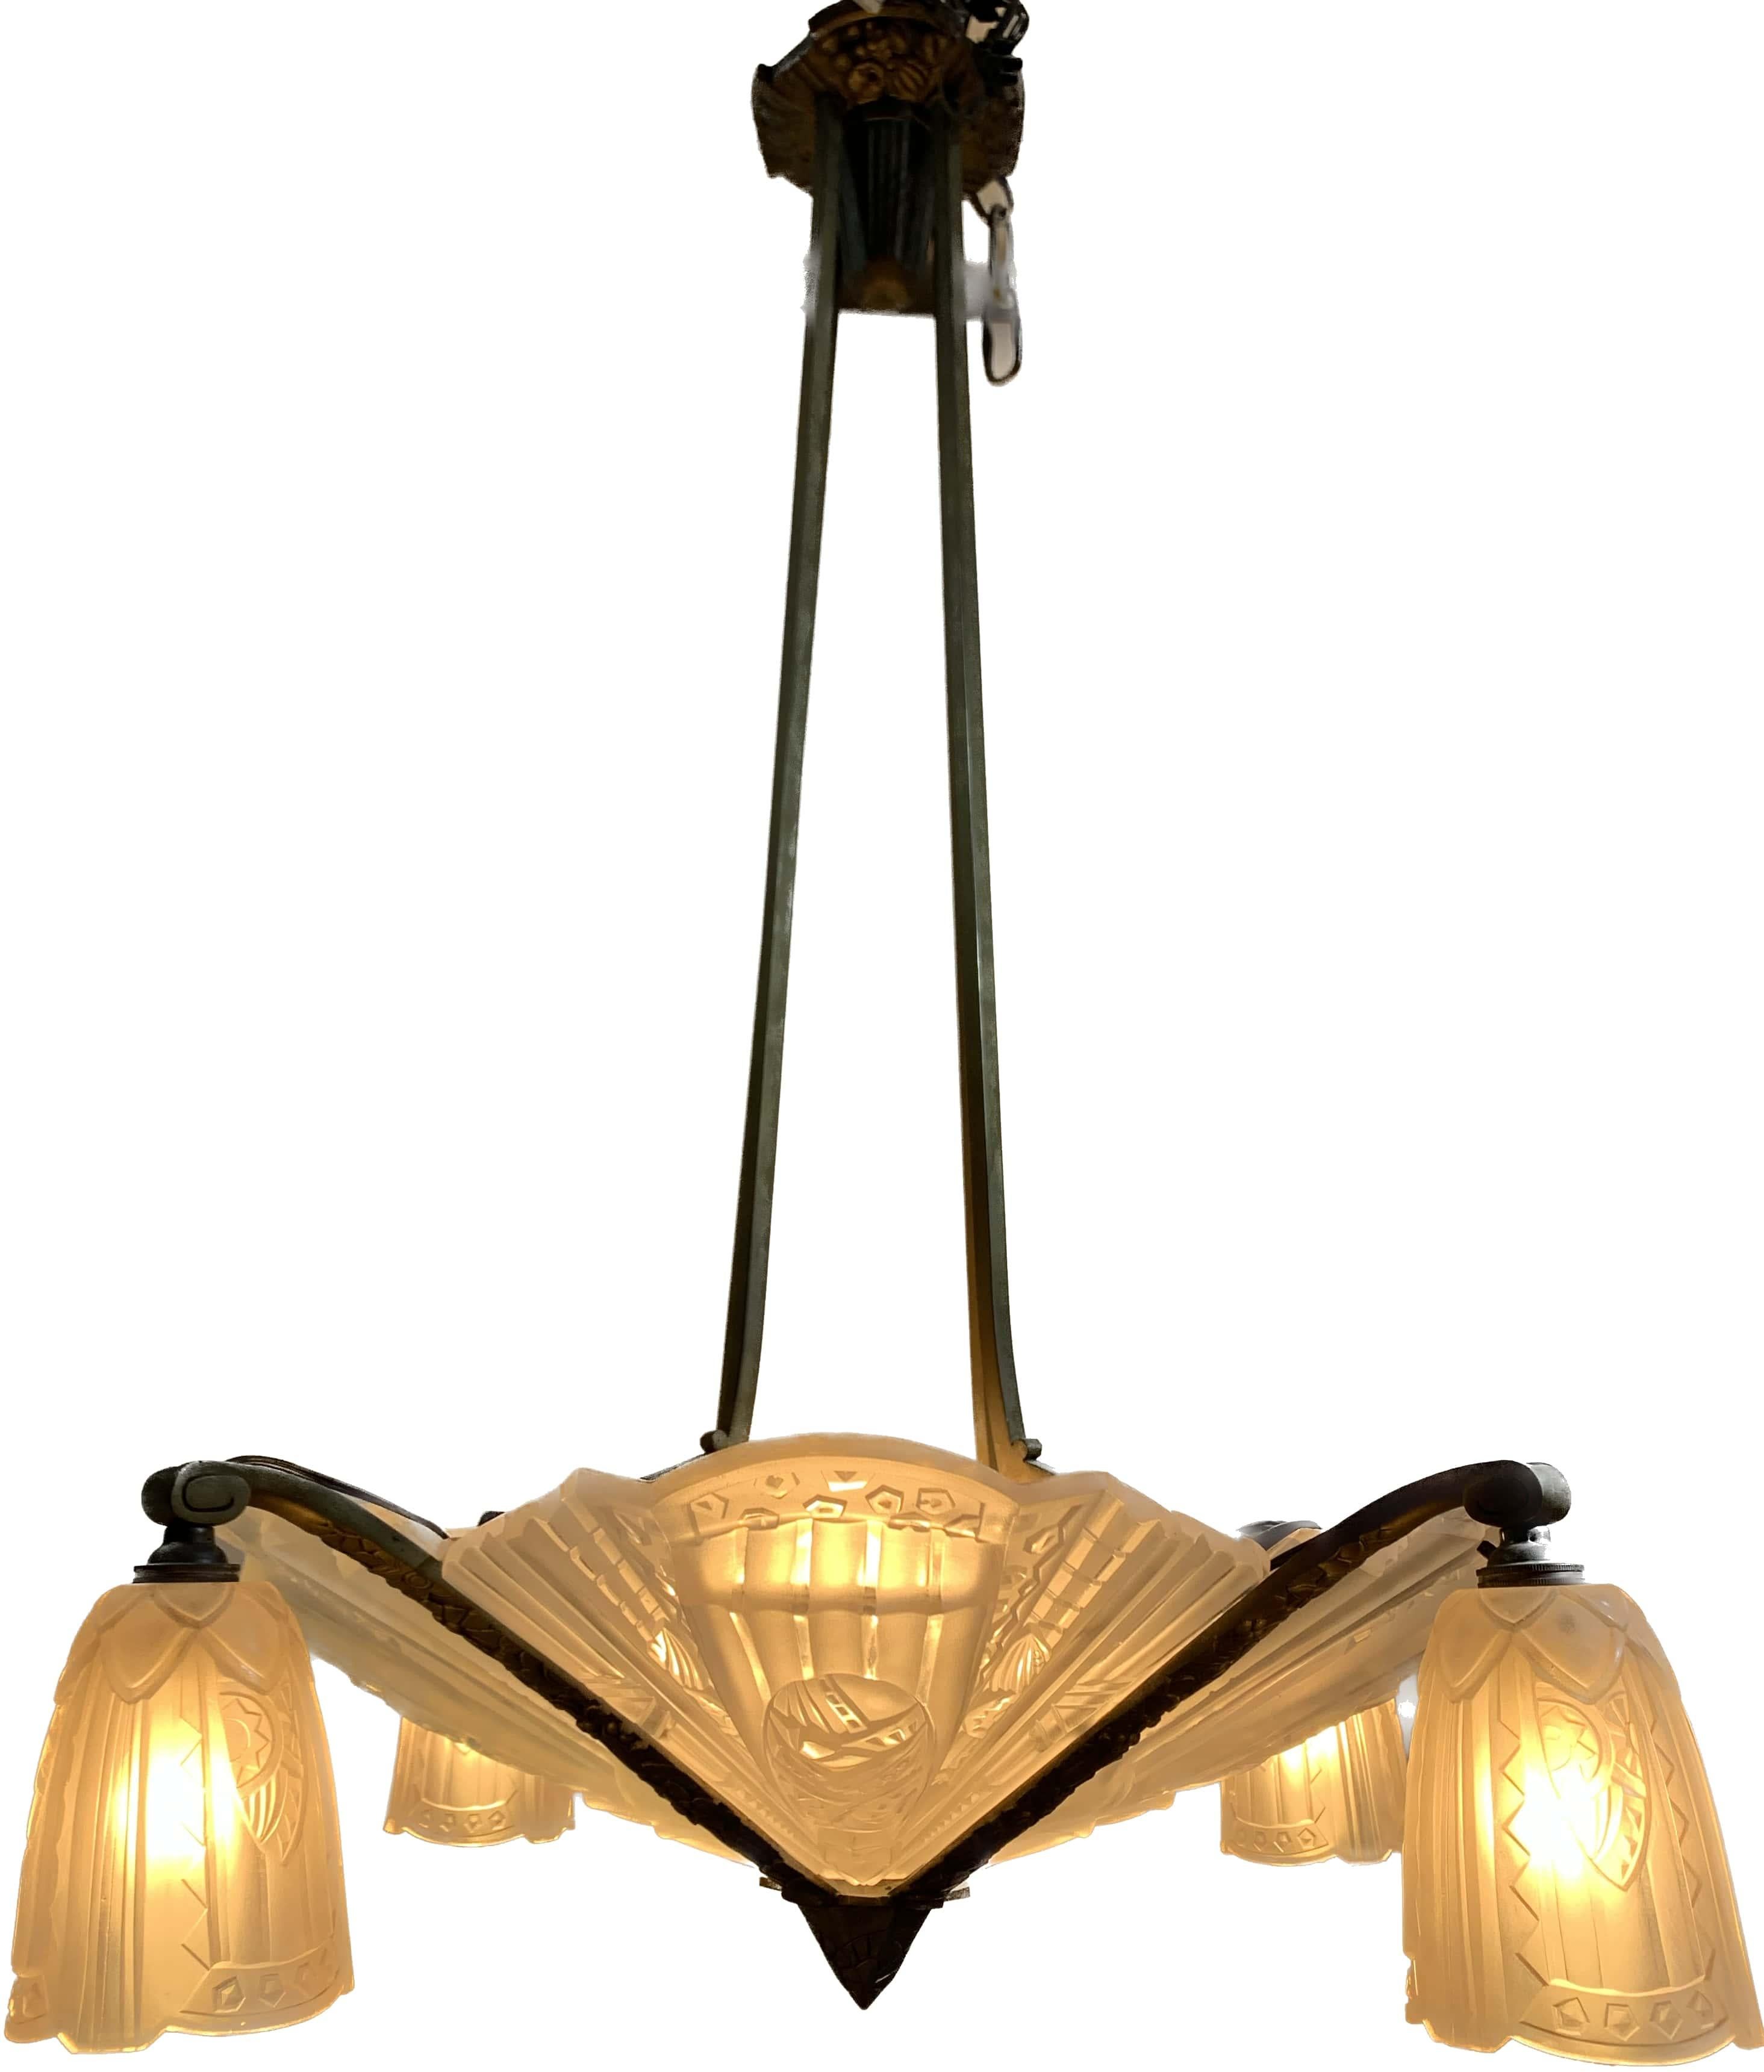 Mid-20th Century French Art Deco Chandelier circa 1930 Signed Frontisi For Sale